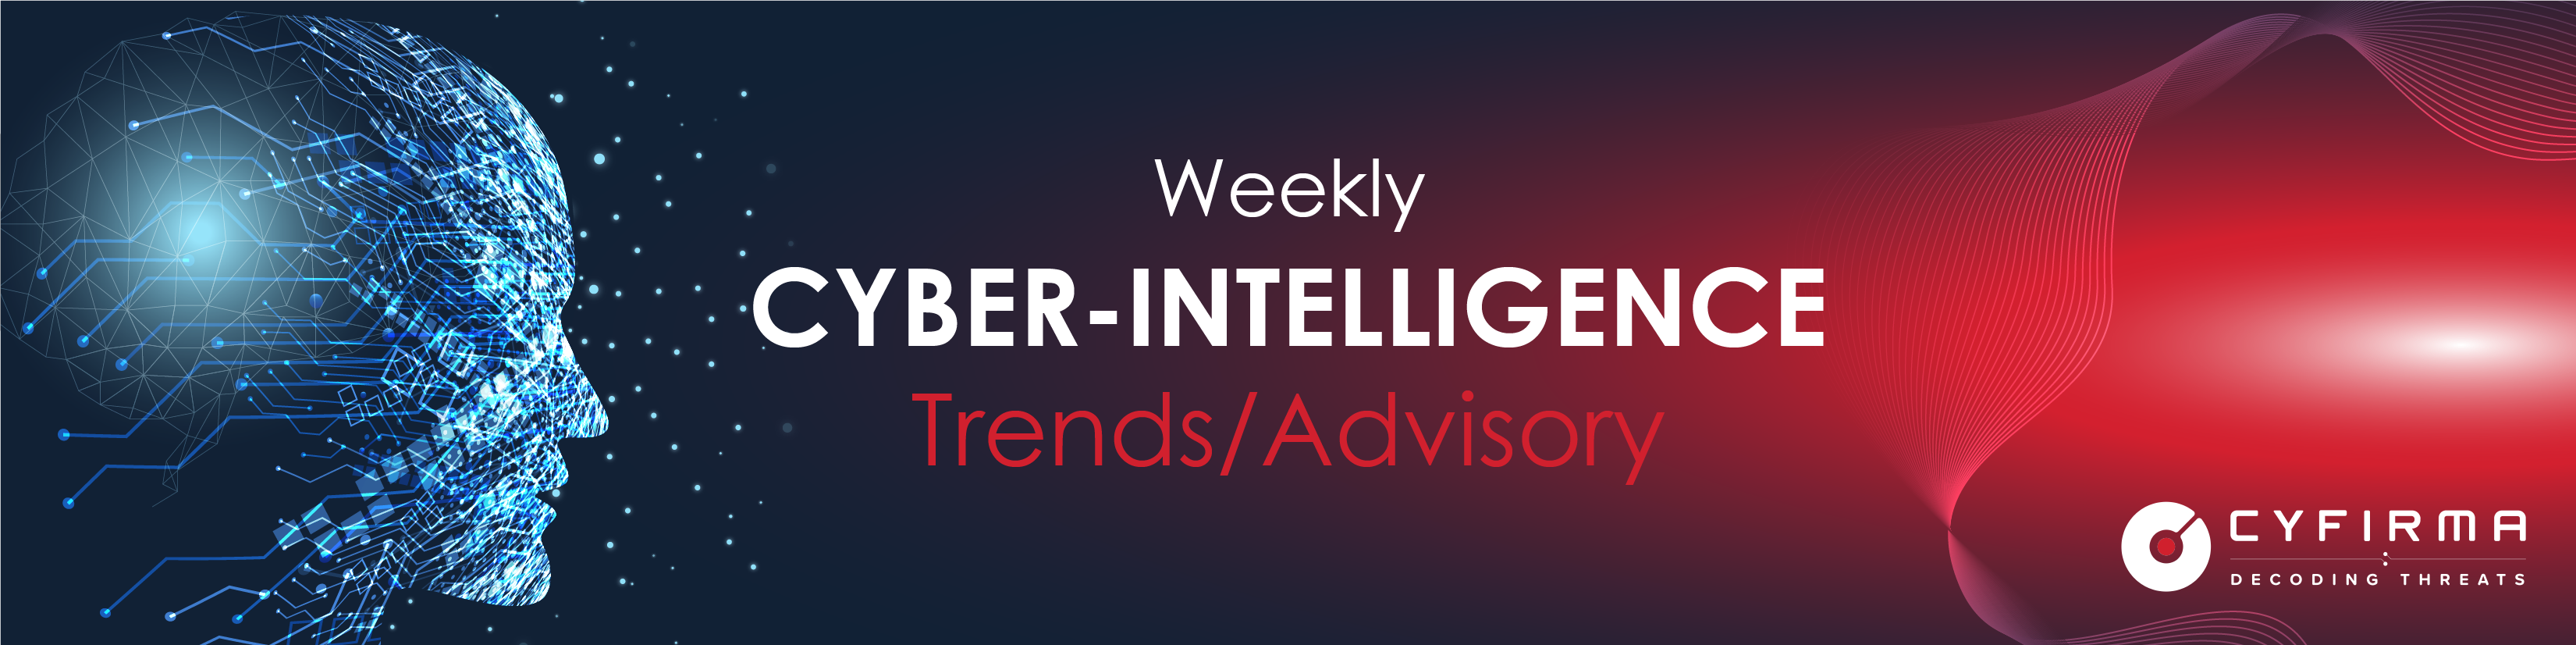 Weekly Intelligence Trends and Advisory | Threat Actor in Focus | Rise in Malware, Ransomware, Phishing | Vulnerability and Exploits – 2 Jan 2022